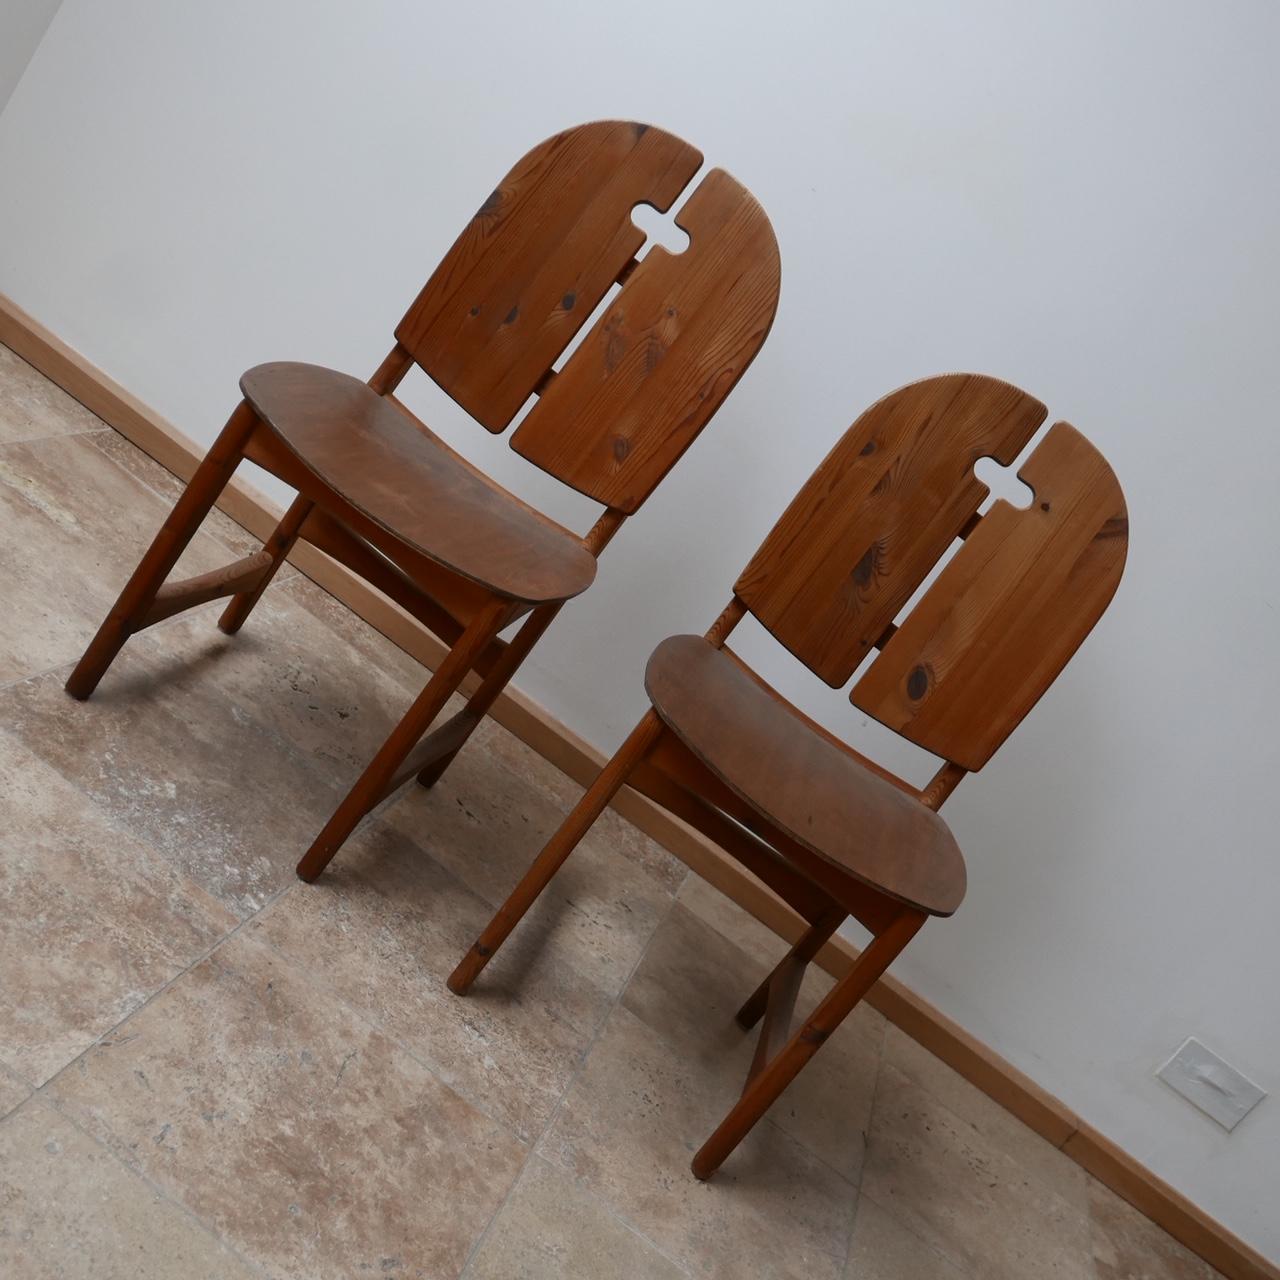 A pair of midcentury occasional chairs, ideal for a bedroom or hallway.

Formed mostly of pine with ply seat rests which could easily be covered in fabric.

Swedish, circa 1960s.

Good vintage condition and timeless form.

Dimensions: 47 W x